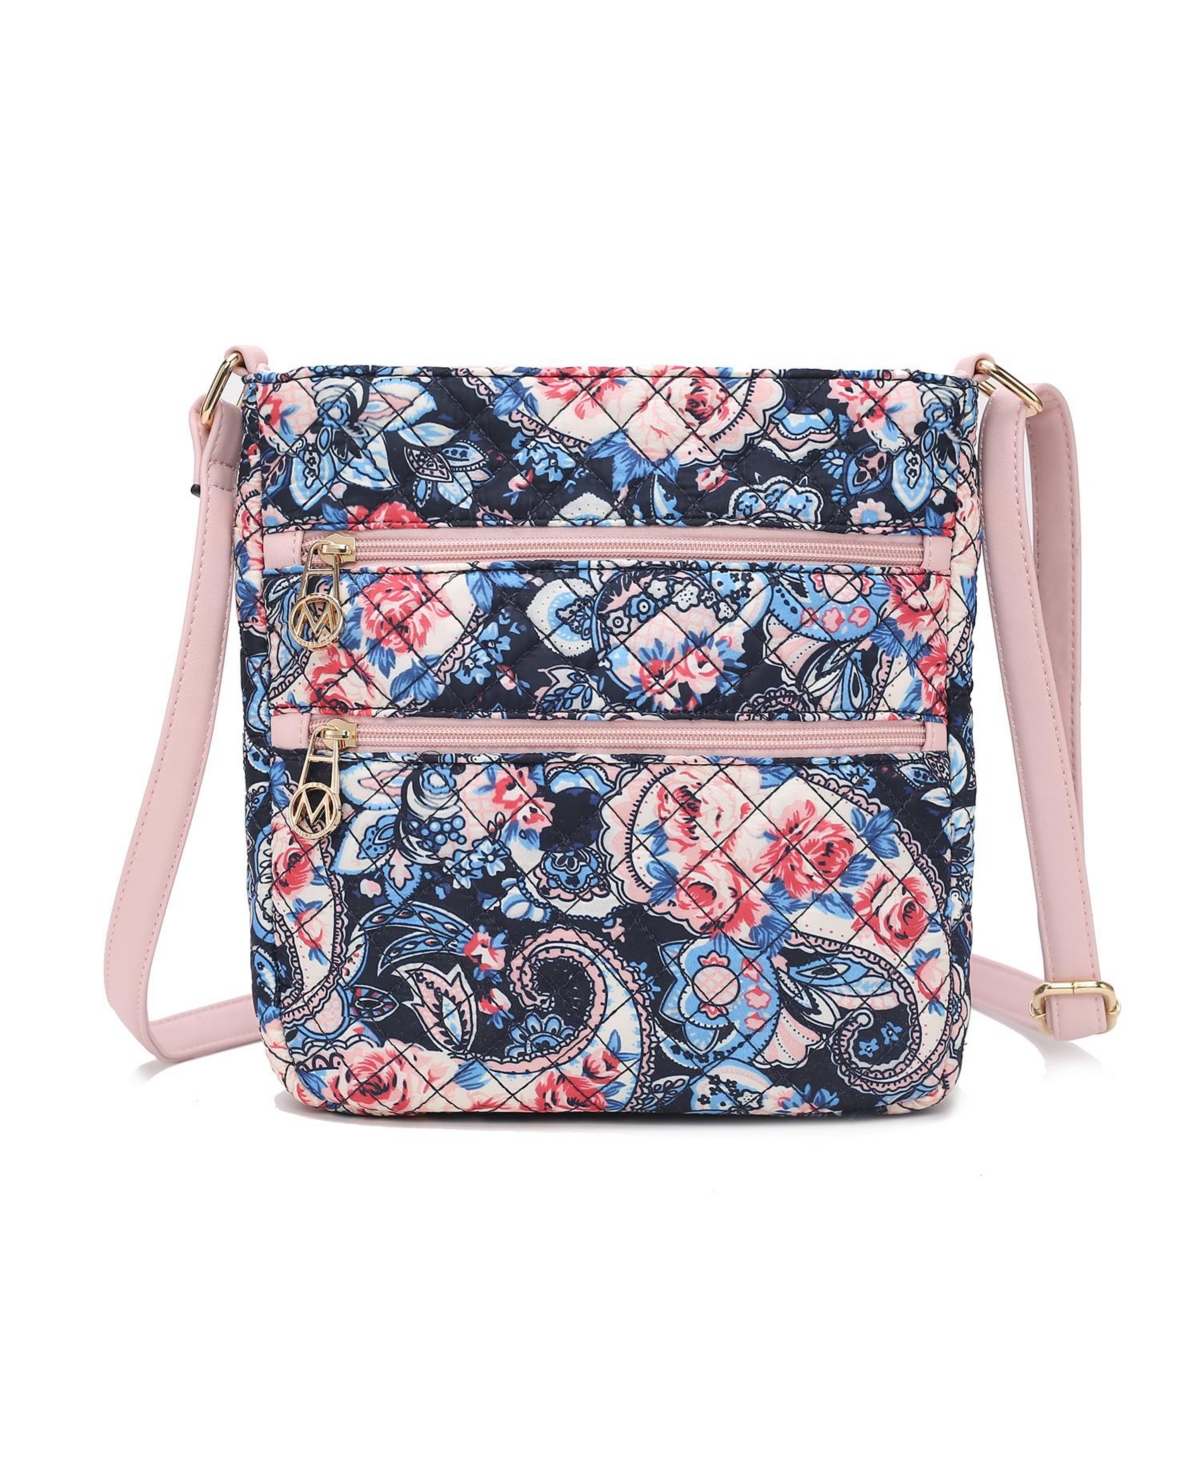 Lainey Quilted floral Pattern Women s Crossbody by Mia K - Blush mauve